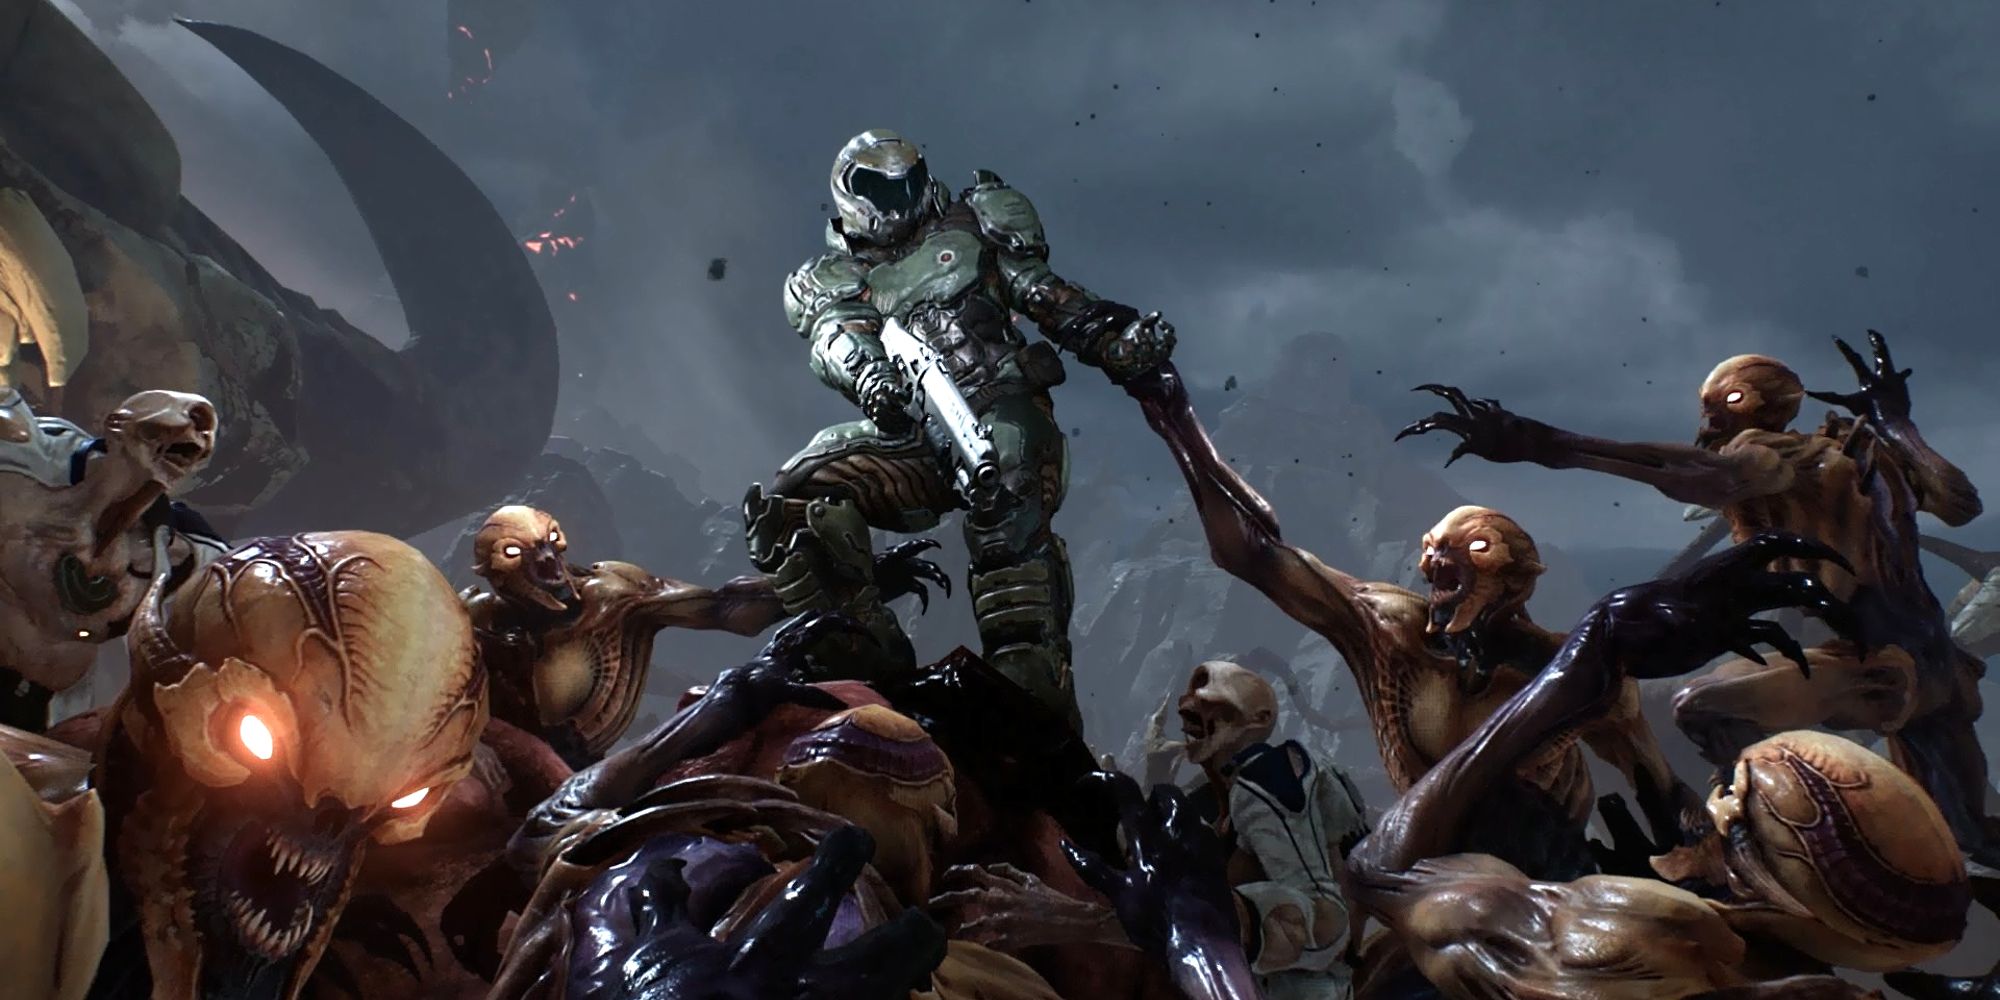 Doomslayer surrounded by imps in Doom 2016